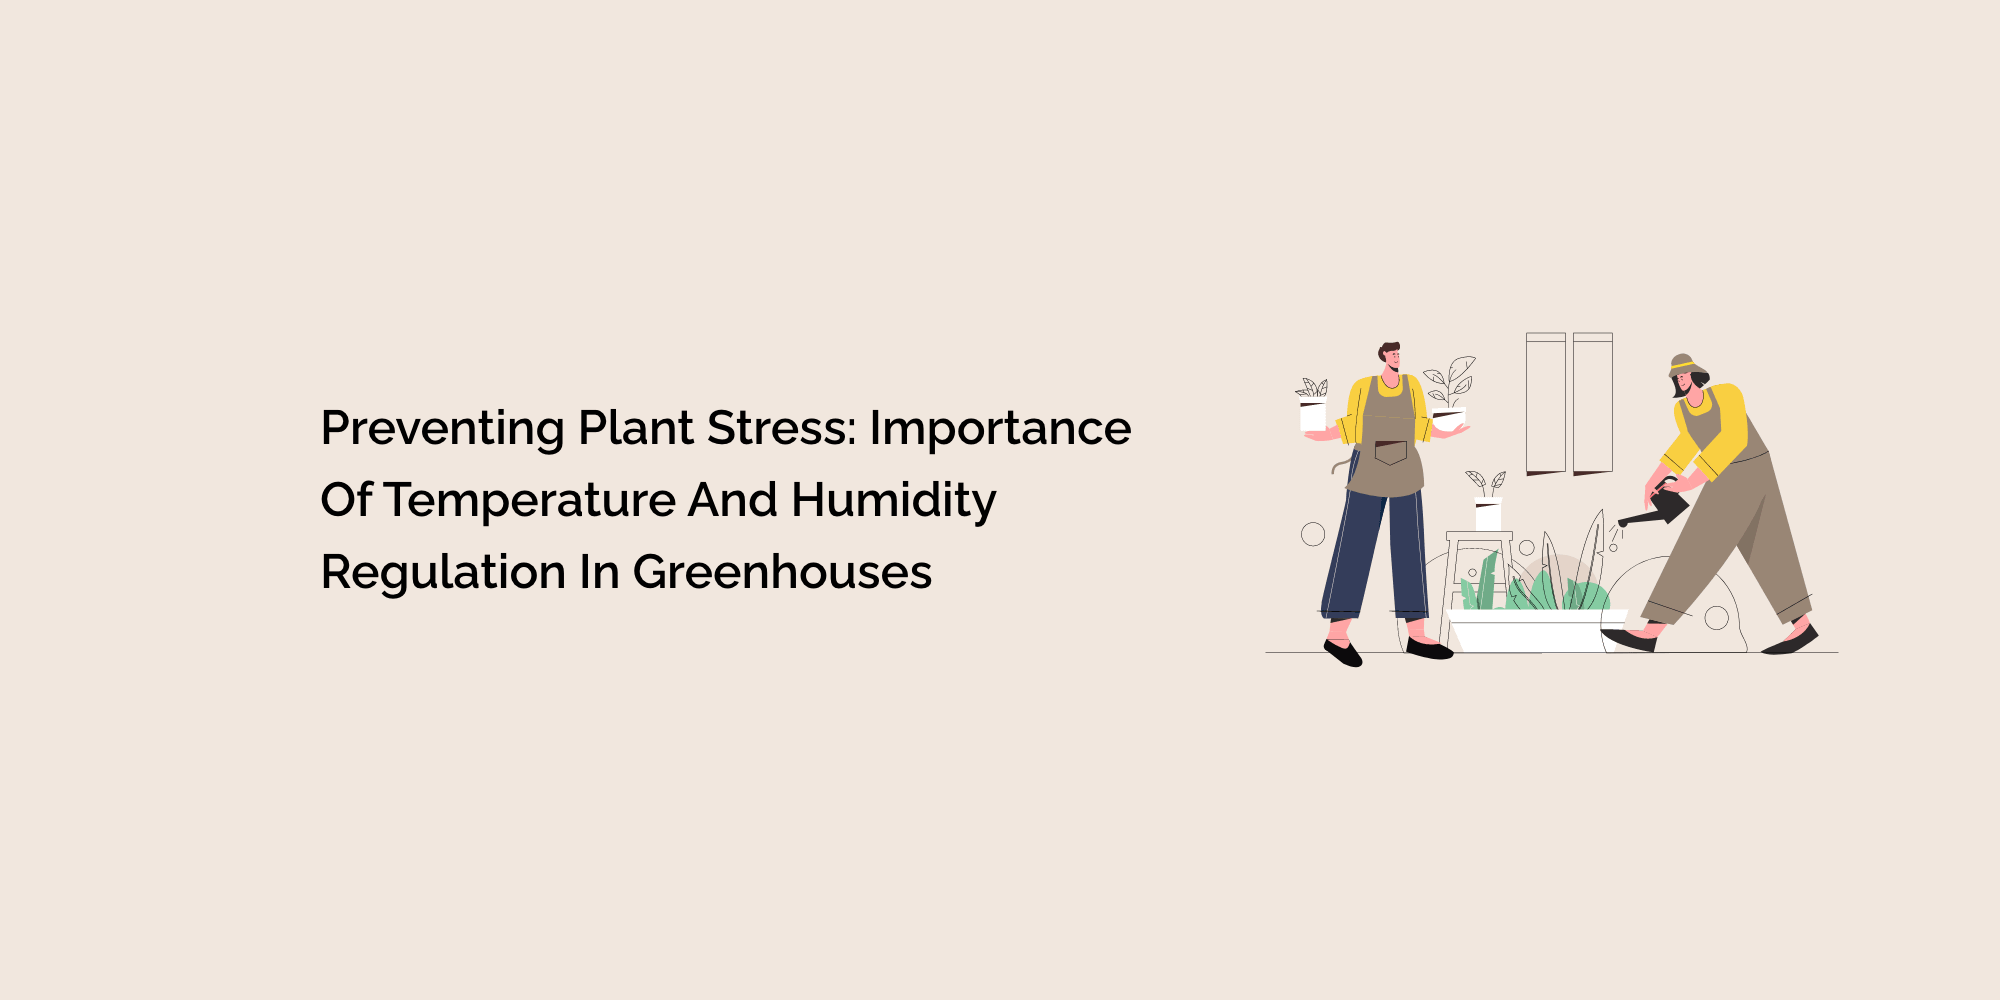 Preventing Plant Stress: Importance of Temperature and Humidity Regulation in Greenhouses